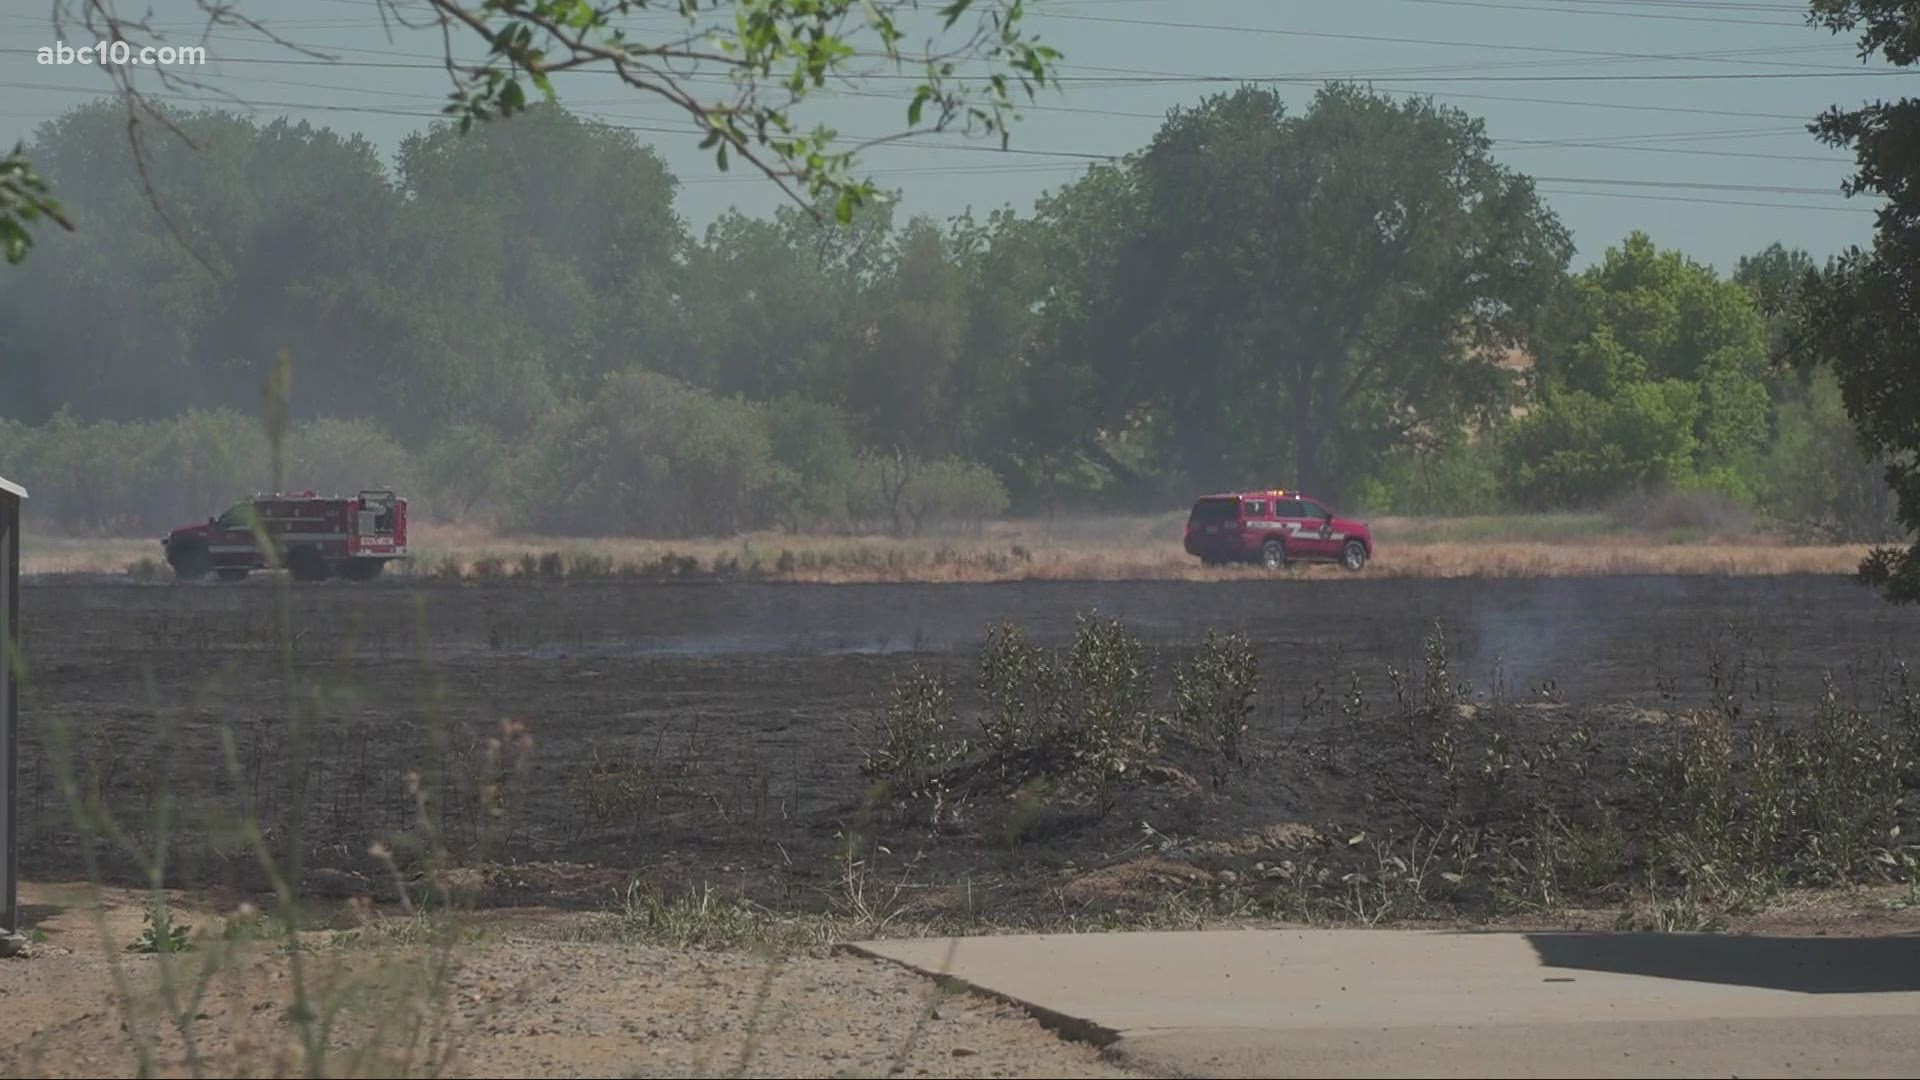 The fire started in the Lower American River Parkway, according to the Sacramento Fire Department.